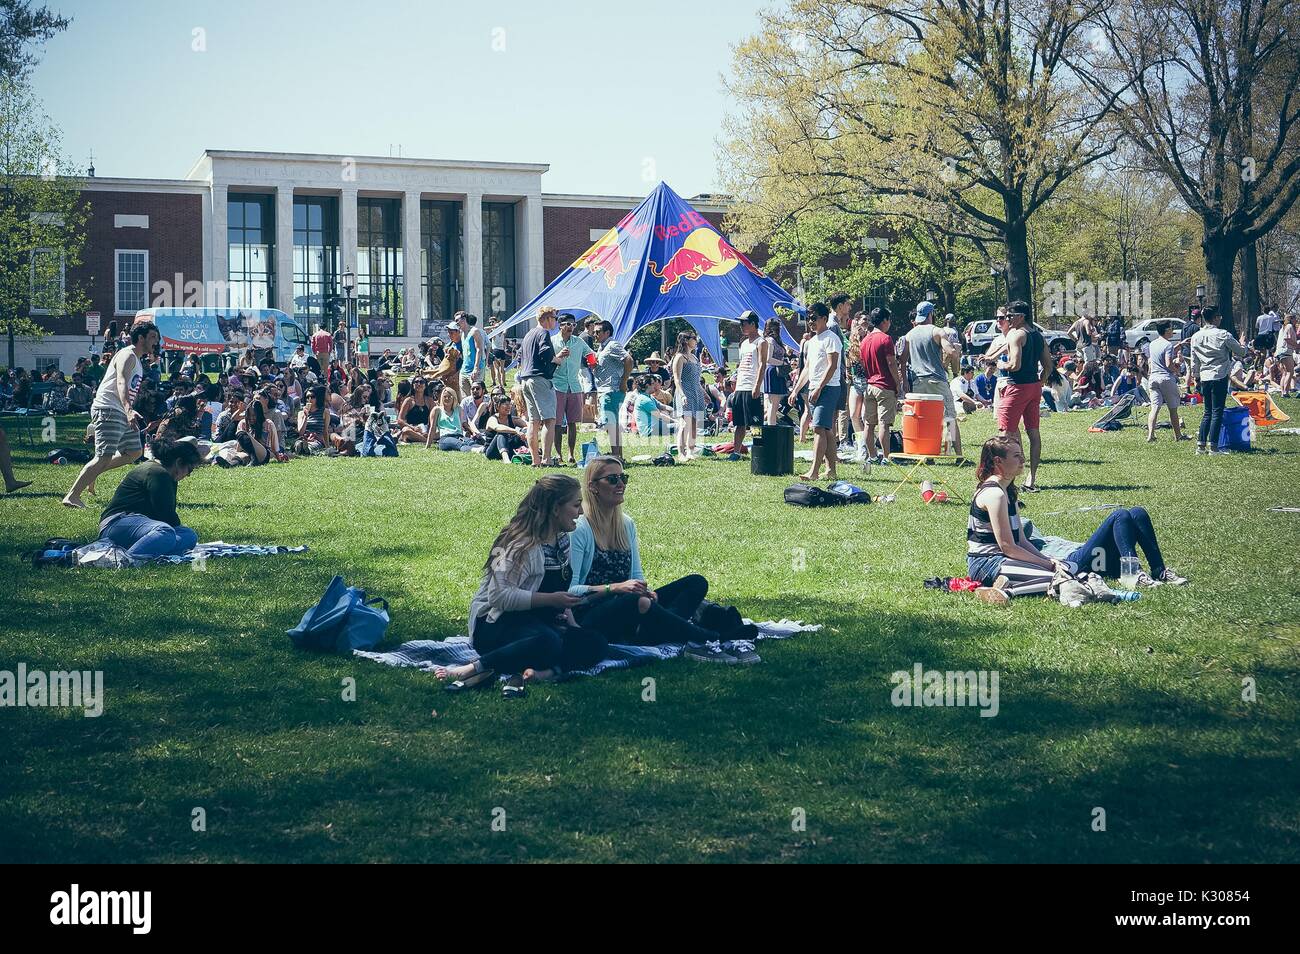 Dozens of students huddle and sunbathe on the grassy Beach, with drinks all around and a large Red Bull tent in the center, during Spring Fair, a student-run spring carnival at Johns Hopkins University, Baltimore, Maryland, April, 2016. Courtesy Eric Chen. Stock Photo